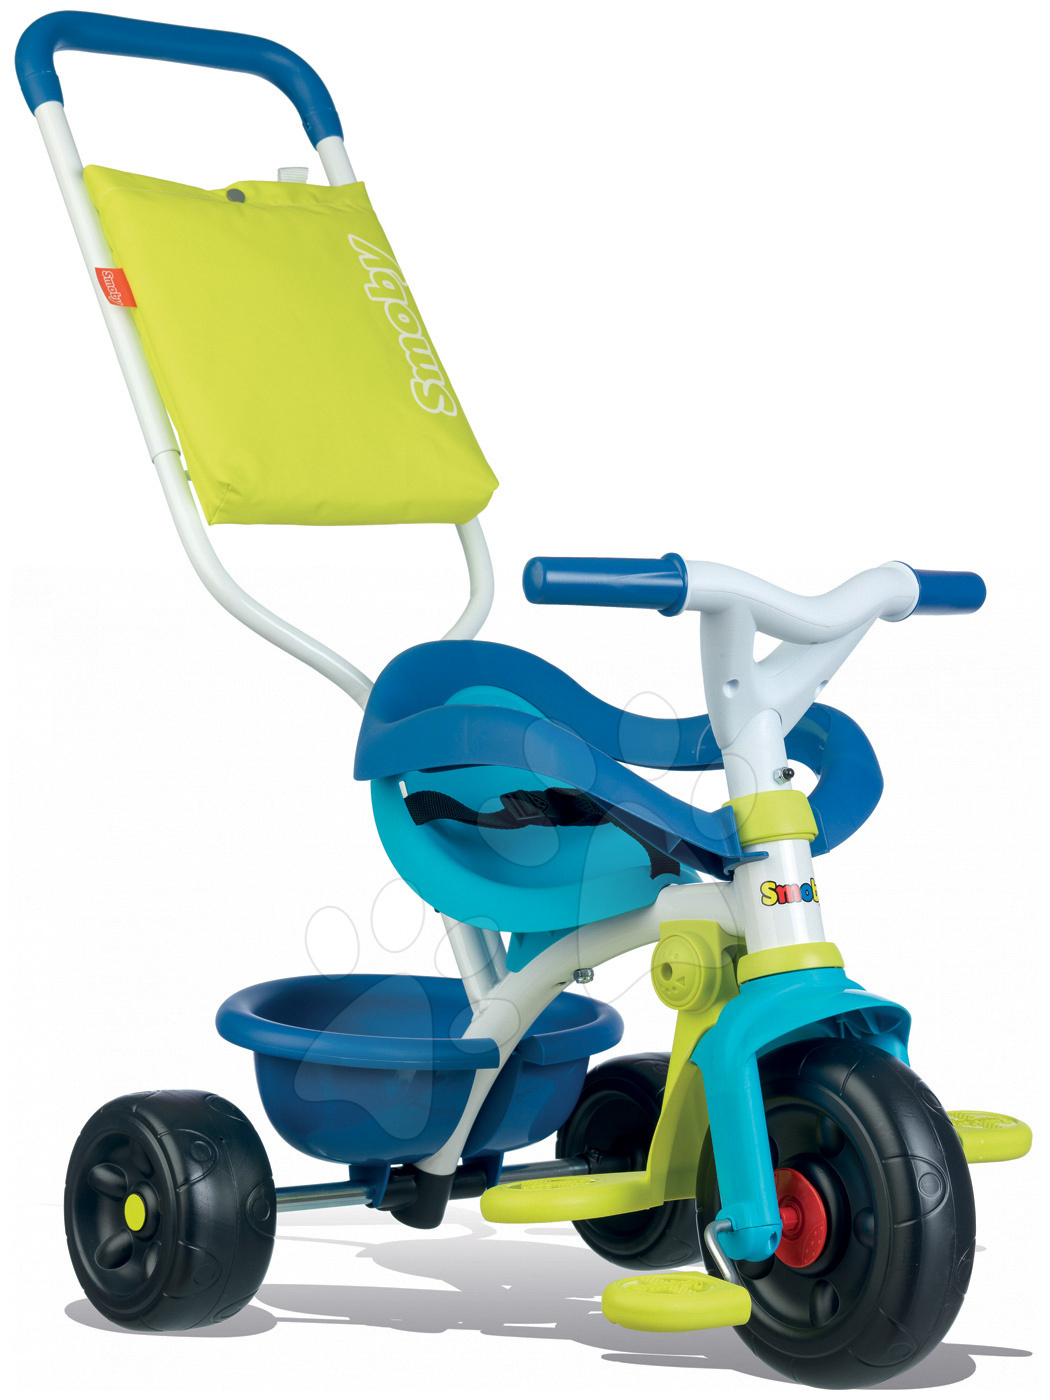 Trikes from 10 months - Be Fun Confort Blue Smoby Tricycle for Children blue, 10 months and over